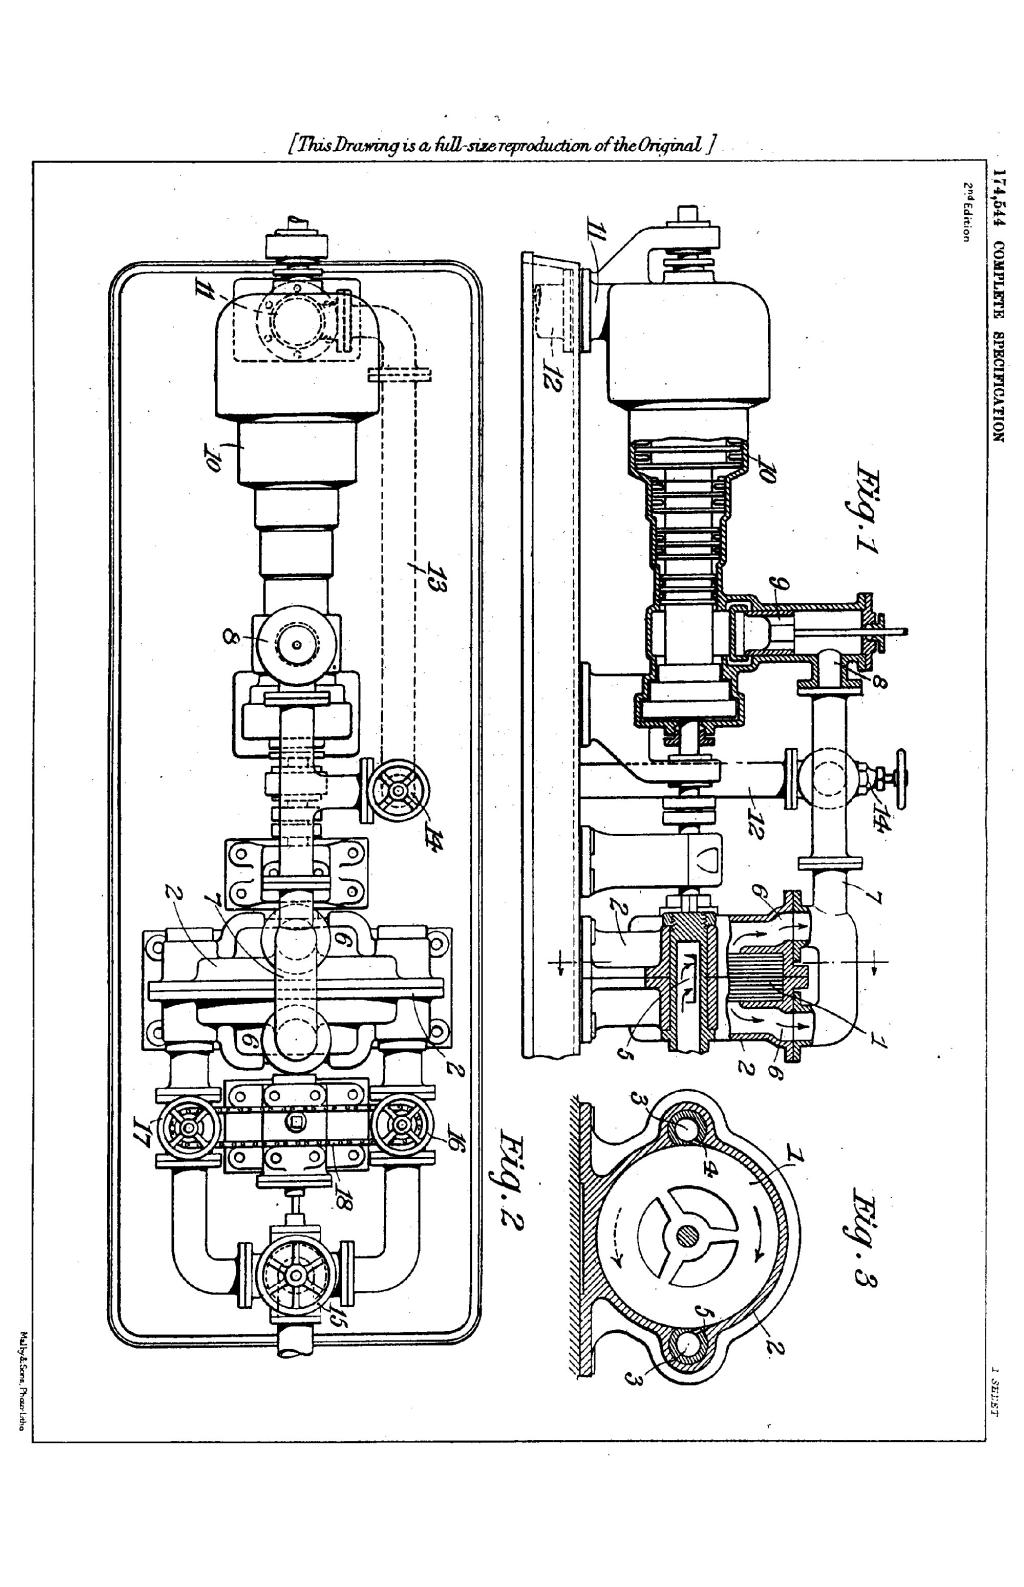 Nikola Tesla British Patent 174,544 - Improvements in Methods of and Apparatus for the Generation of Power by Elastic Fluid Turbines - Image 1